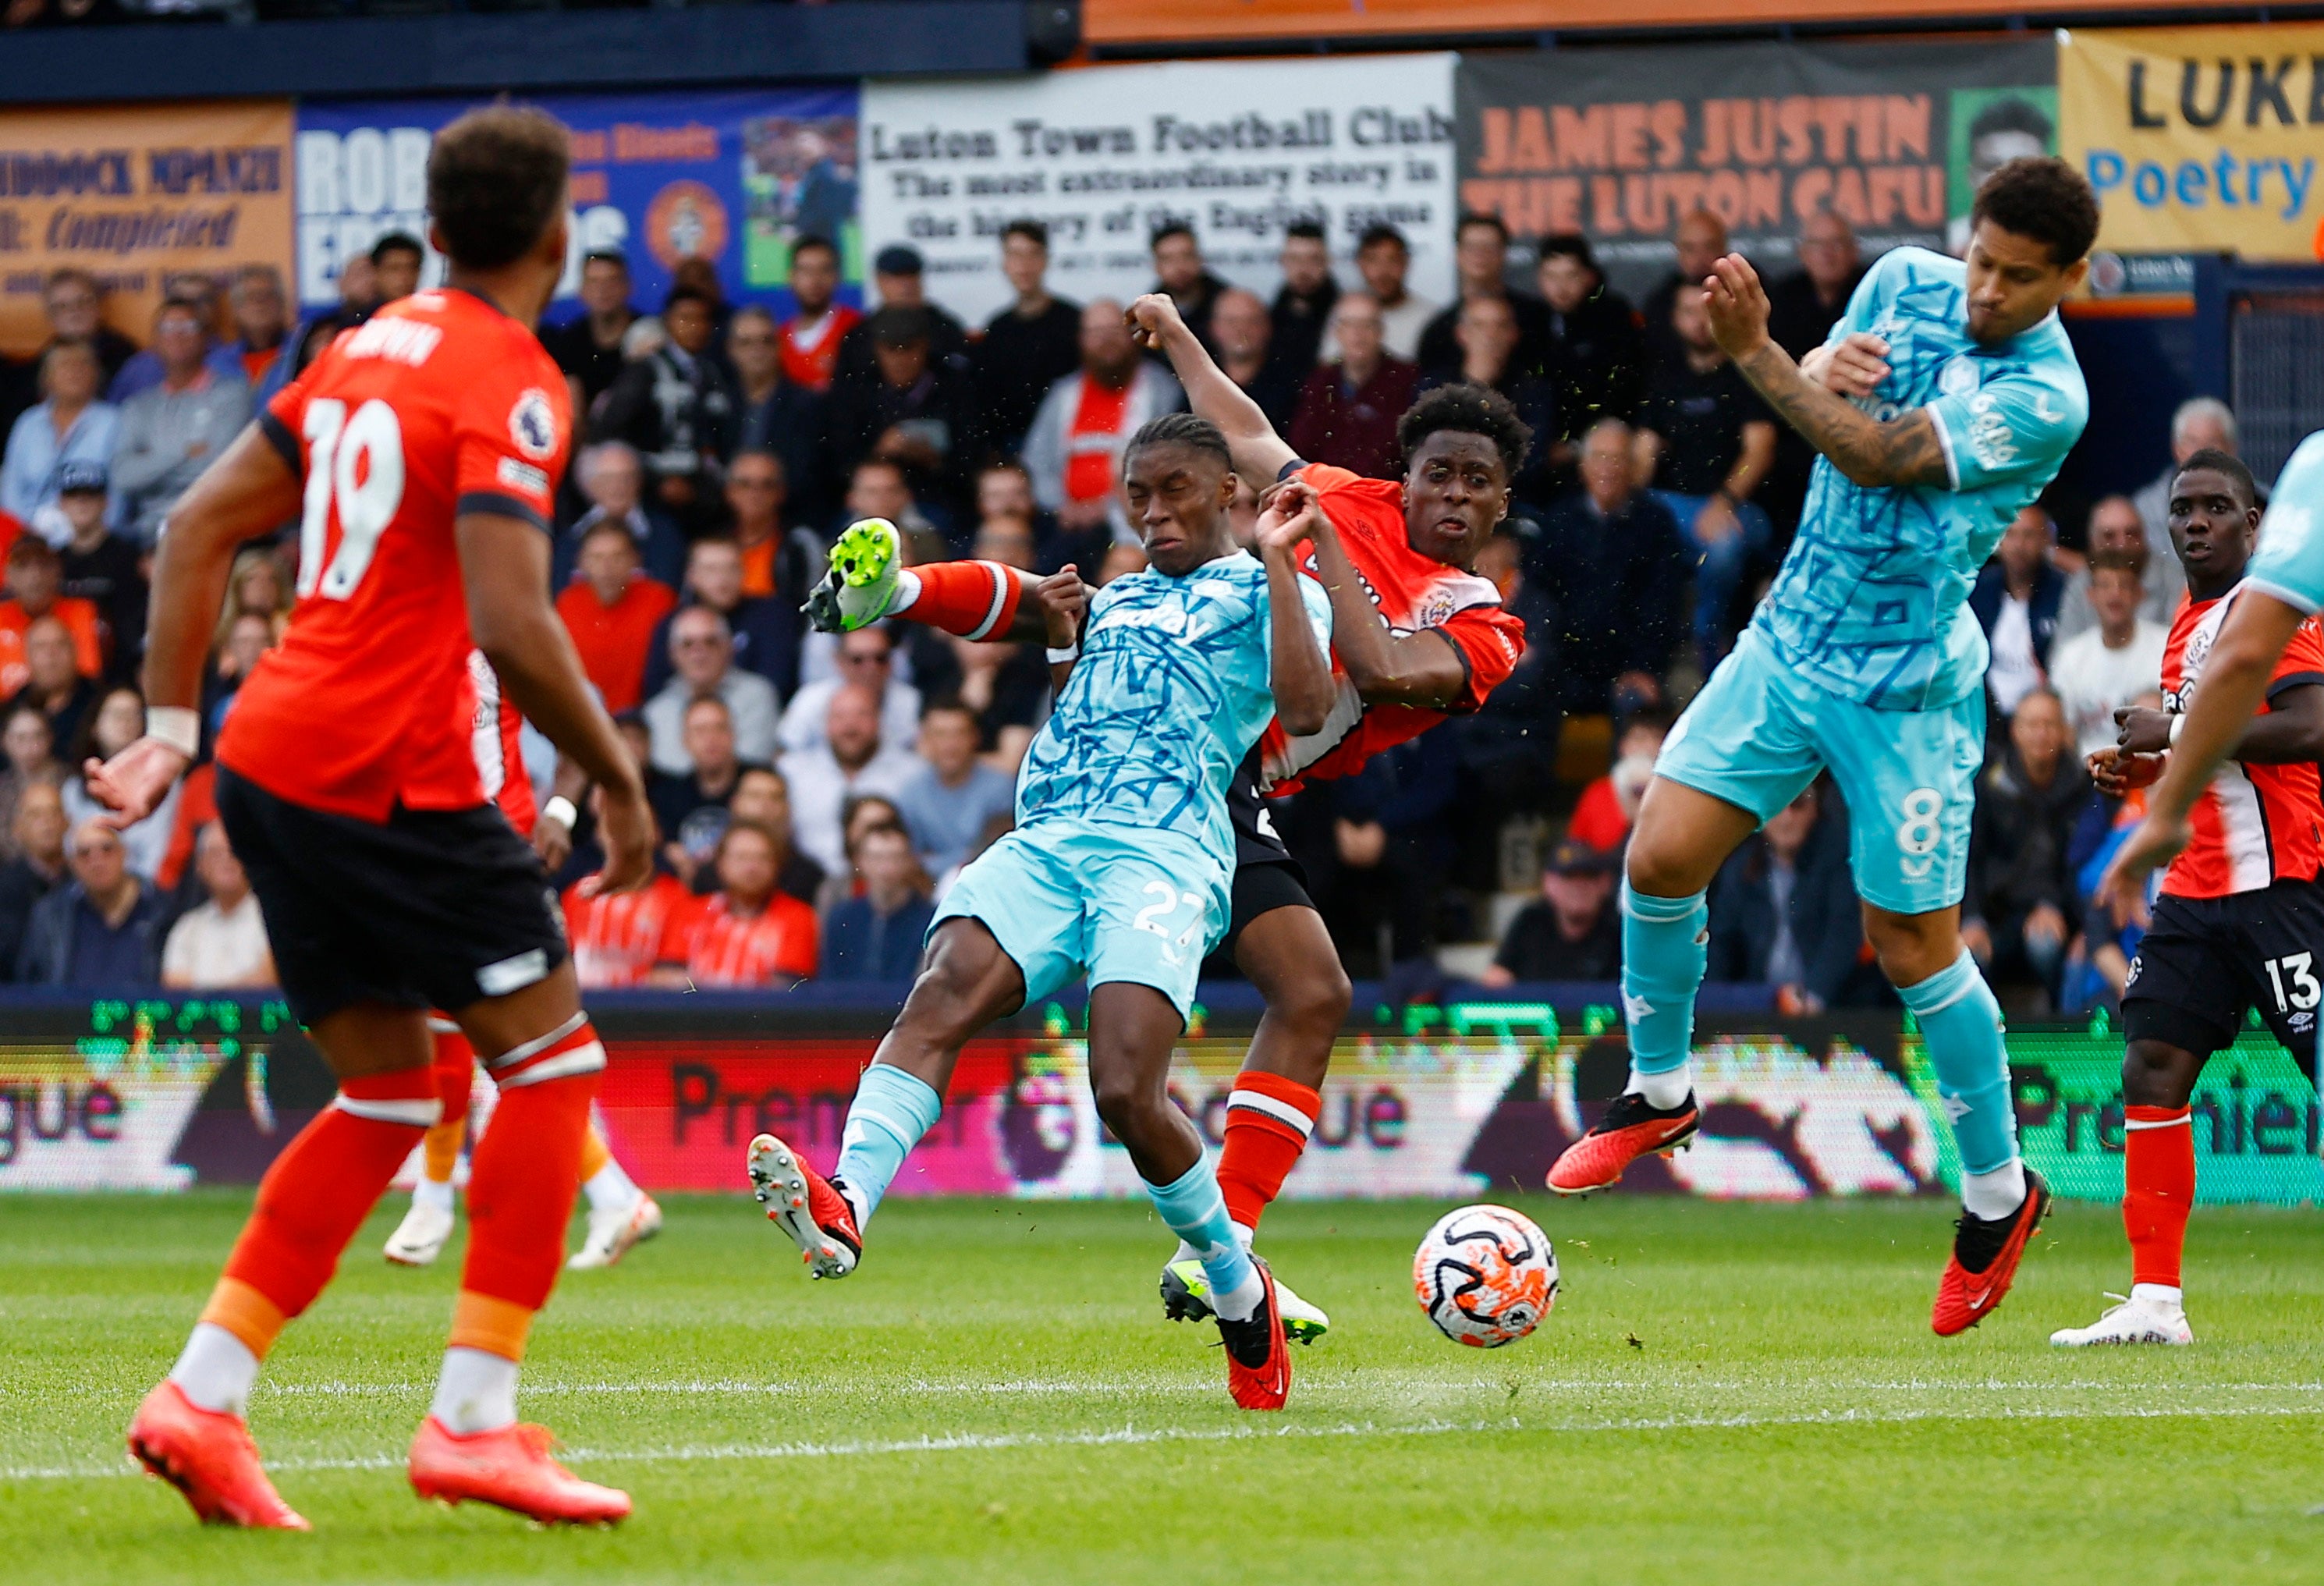 Luton claimed their first point of the Premier League season against Wolves